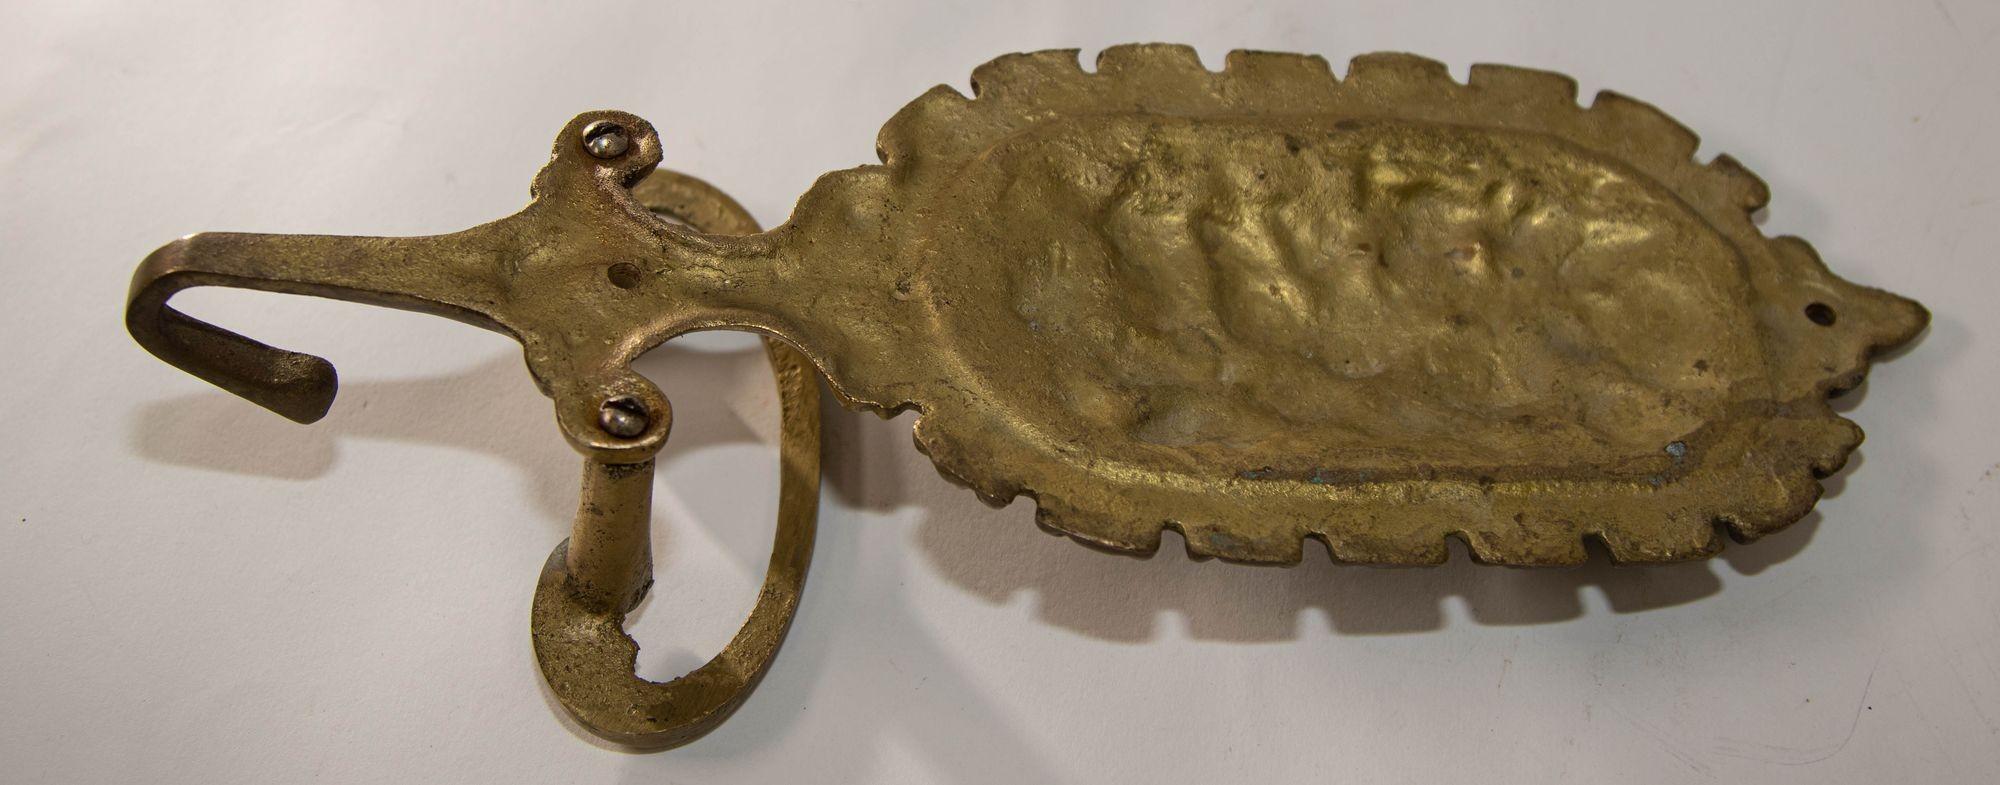 Architectural Italian Cast Brass Floral Wall Hook Decor Made in Italy 2